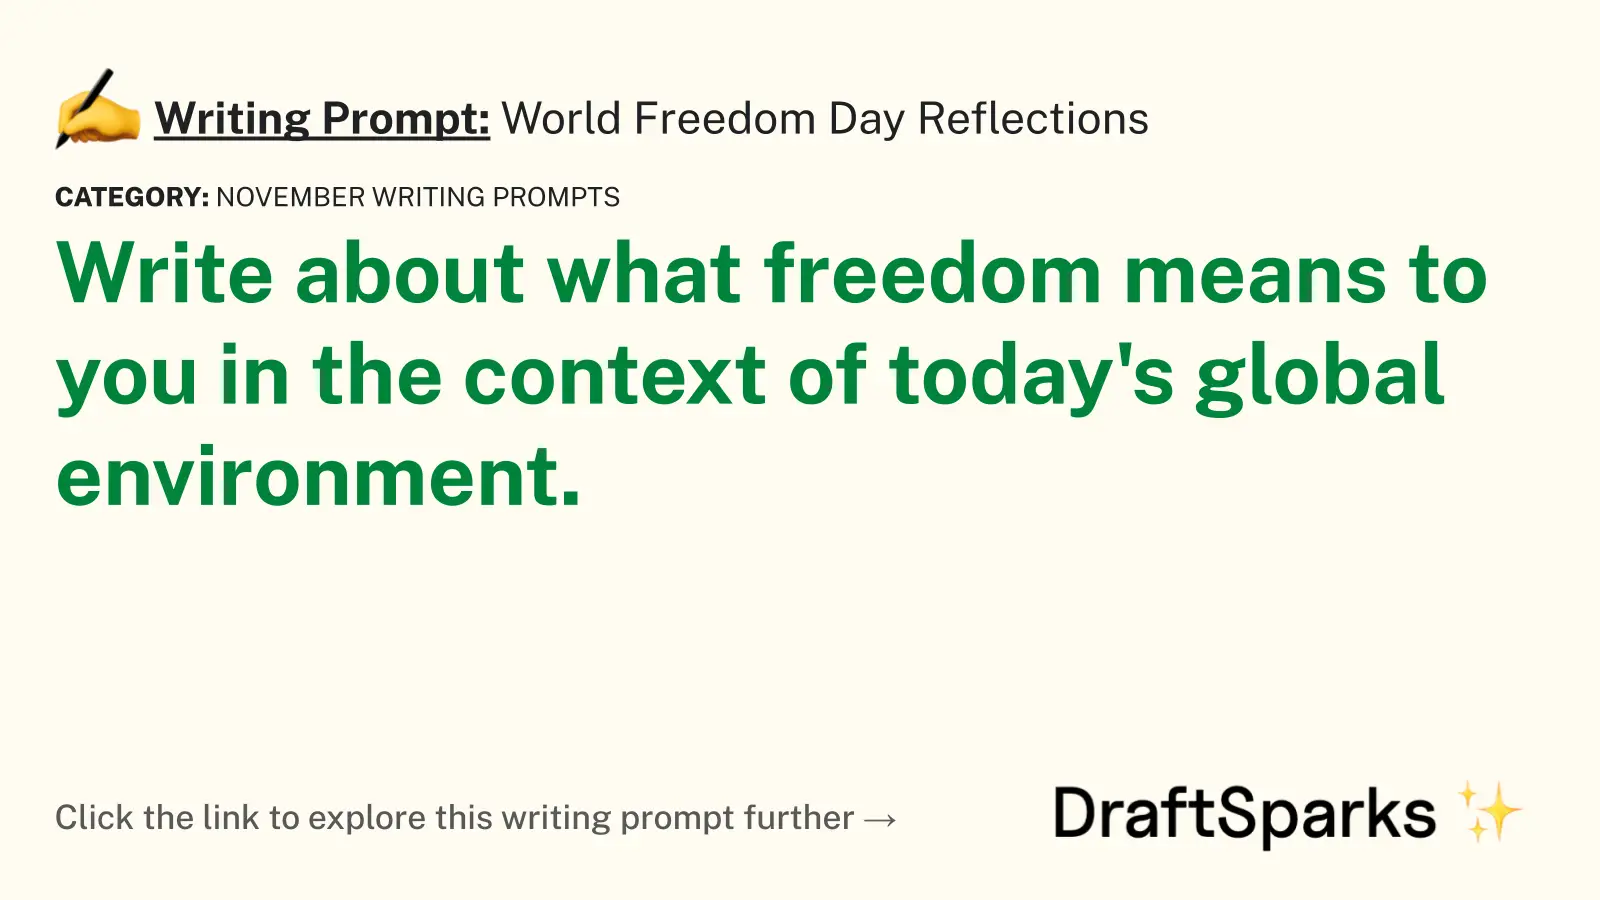 World Freedom Day Reflections